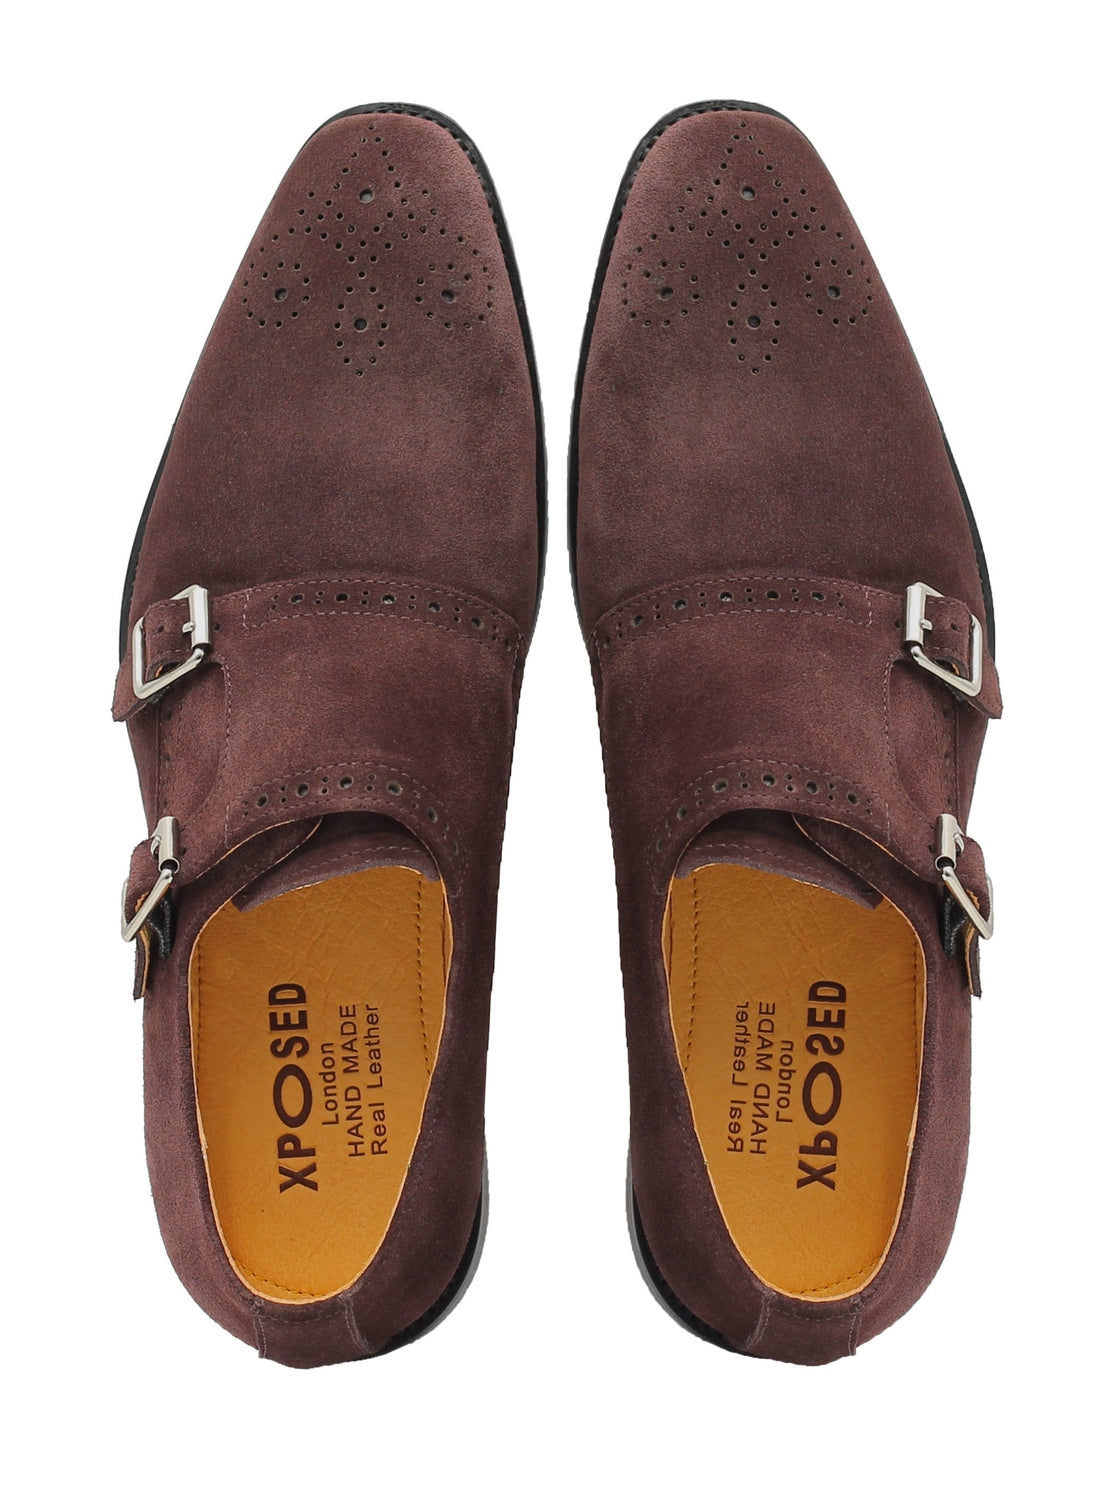 BROWN SUEDE DOUBLE MONK SHOES